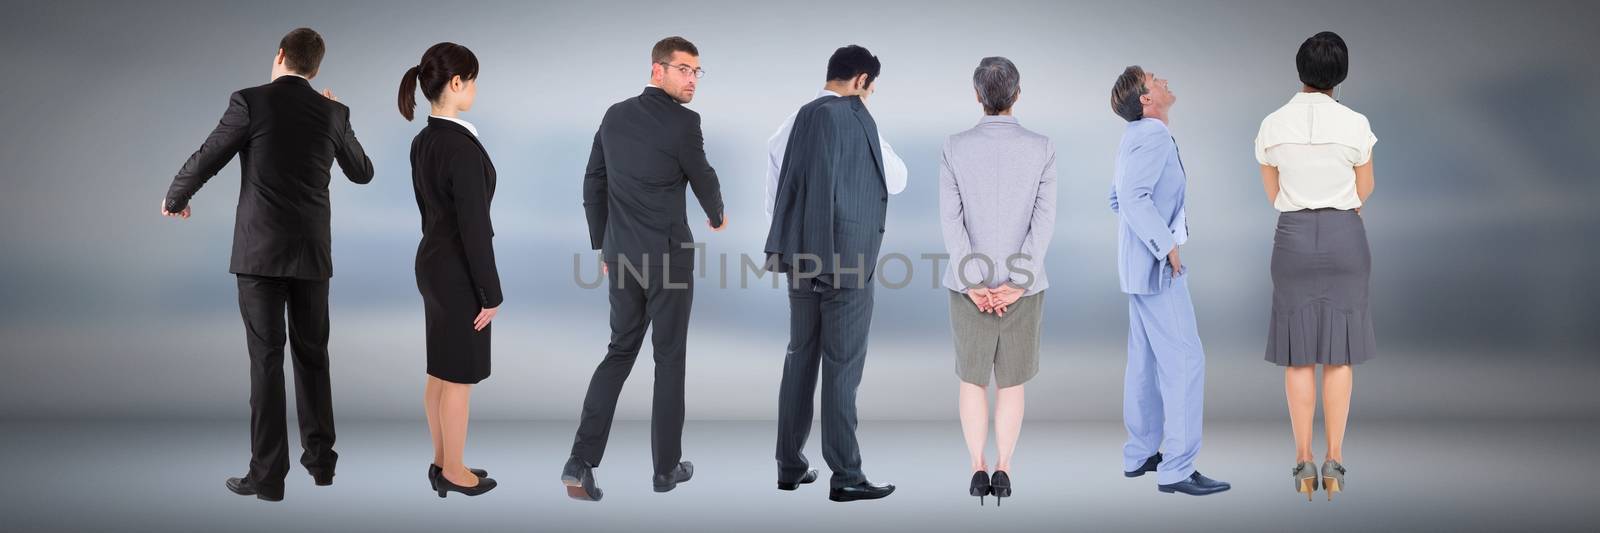 Group of Business People standing with moody background by Wavebreakmedia